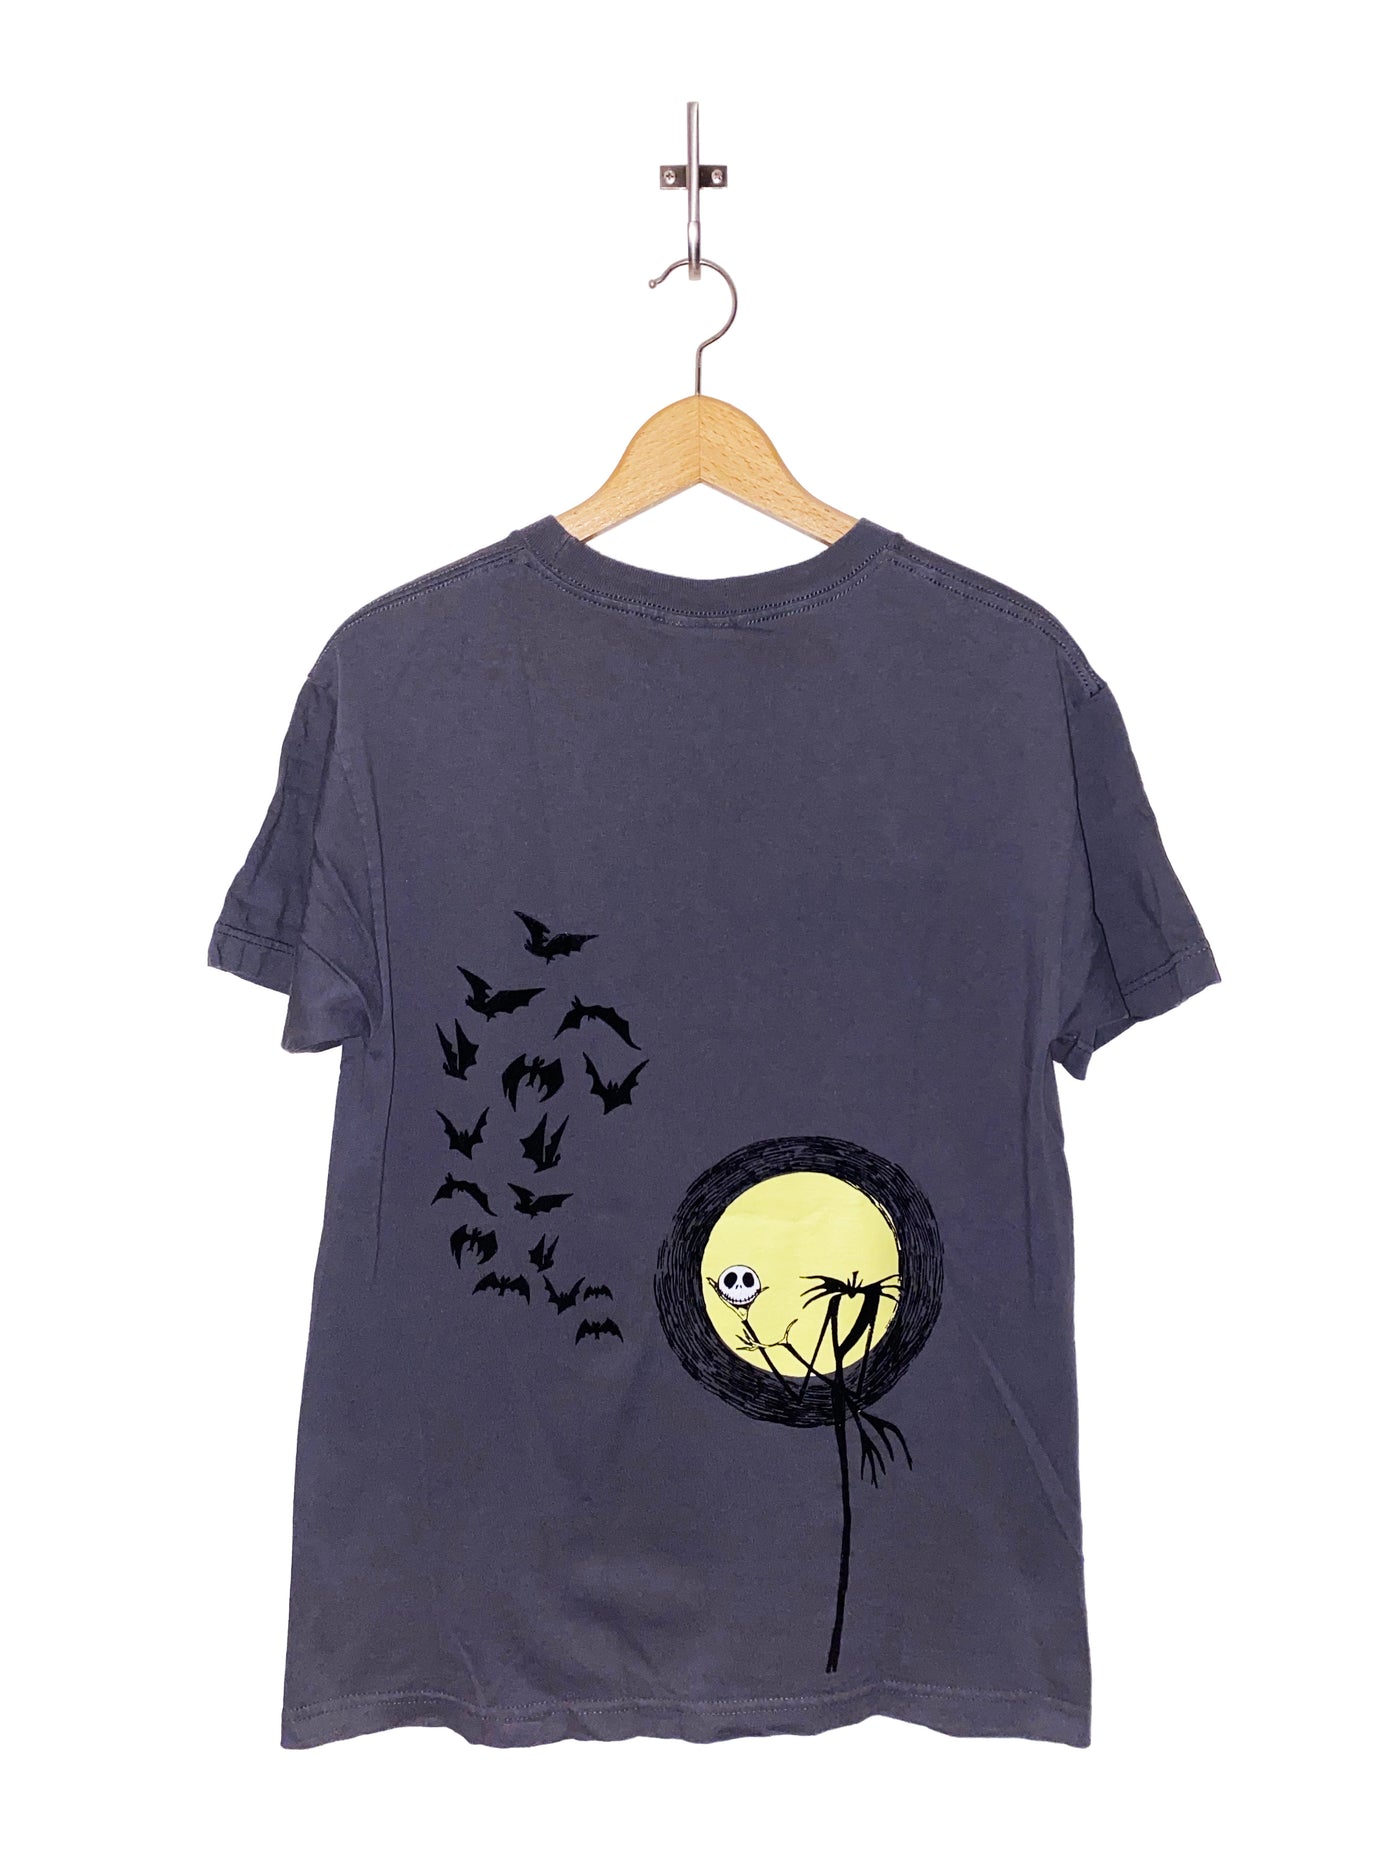 Vintage ‘The Nightmare Before Christmas’ Touchstone Promo T-Shirt